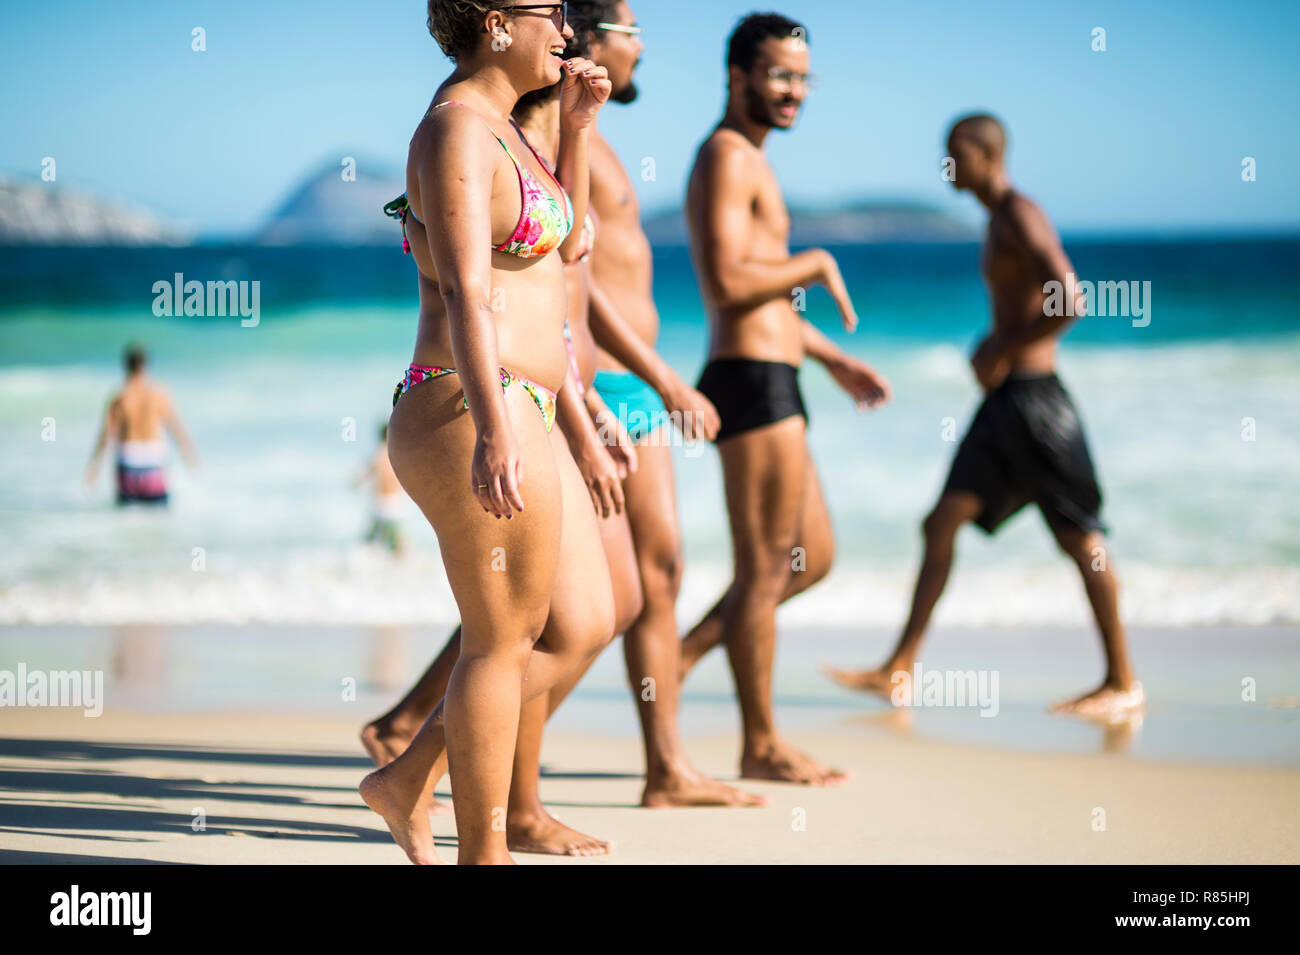 RIO DE JANEIRO - FEBRUARY, 2018: Young Brazilians walk together on Ipanema  Beach, which has a reputation for fit bodies in skimpy swimwear Stock Photo  - Alamy